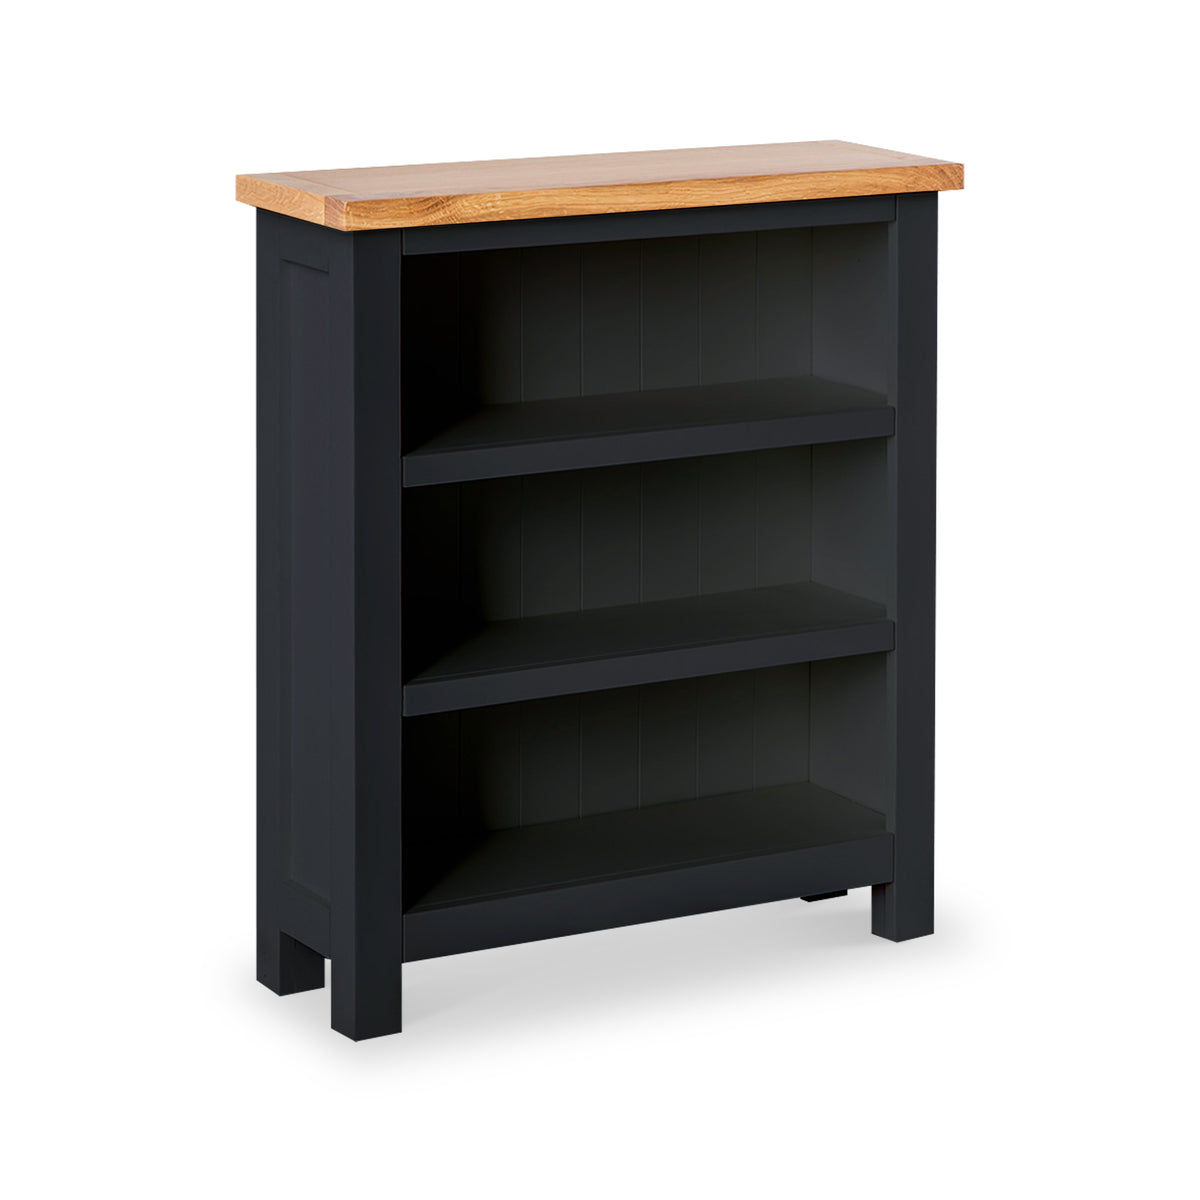 Farrow Black Low Bookcase from Roseland Furniture